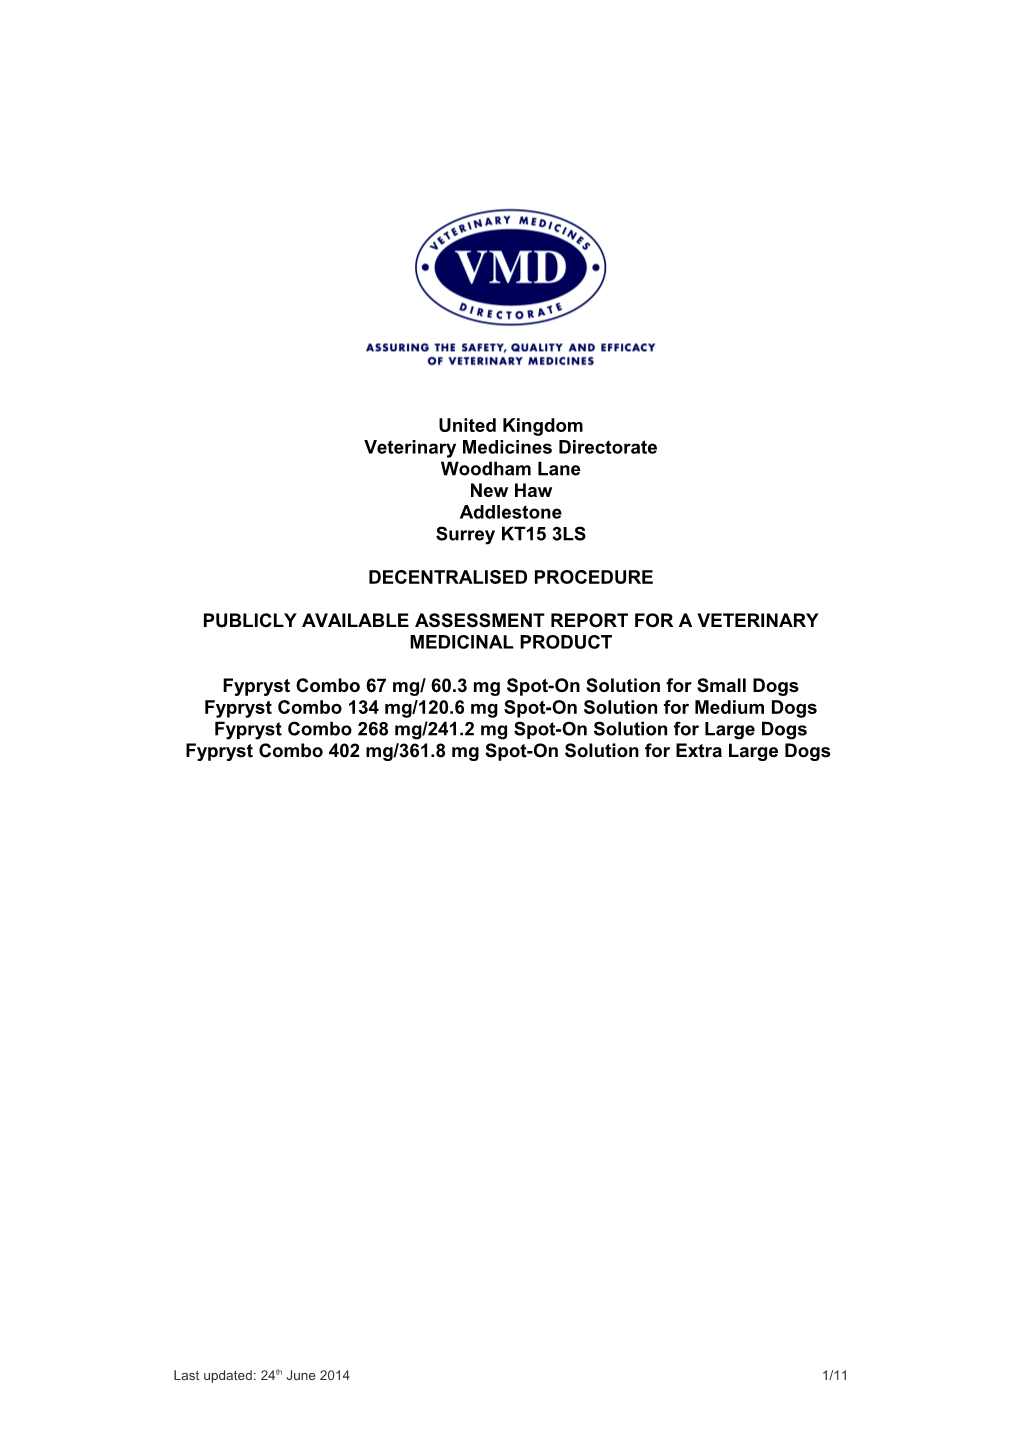 Publicly Available Assessment Report for a Veterinary Medicinal Product s3